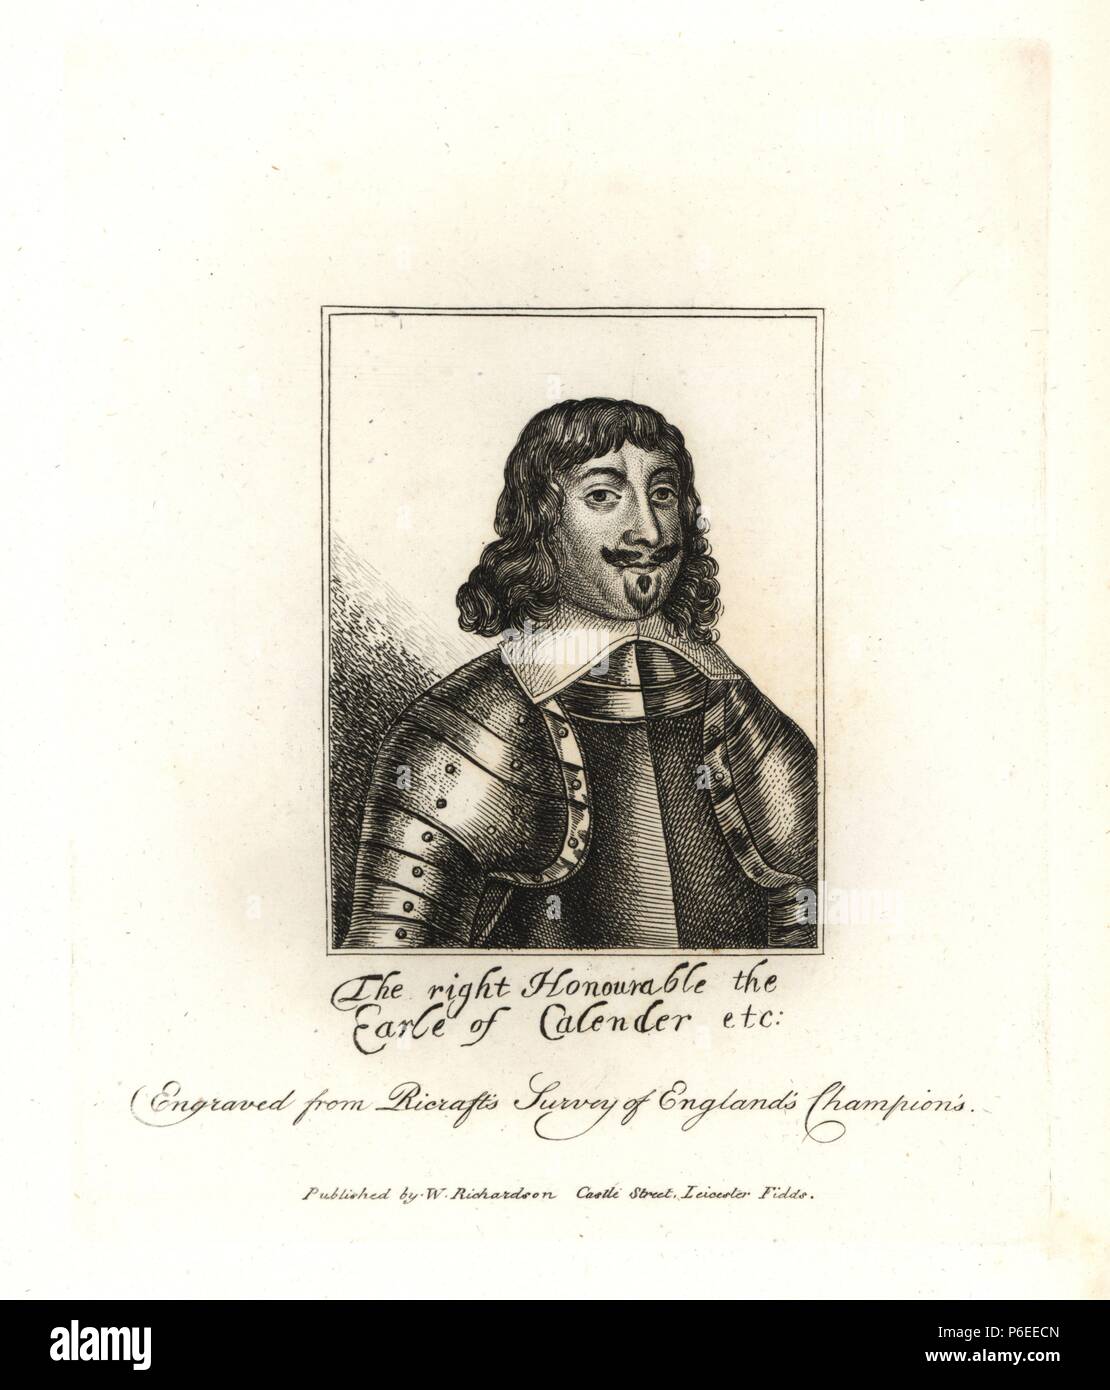 James Livingston, Earl of Callendar, Lieutenant-General in the Royalist Army, died 1672. From a portrait in Ricraft's 'Survey of England's Champions.' Copperplate engraving from Richardson's 'Portraits illustrating Granger's Biographical History of England,' London, 1792–1812. Published by William Richardson, printseller, London. James Granger (1723–1776) was an English clergyman, biographer, and print collector. Stock Photo